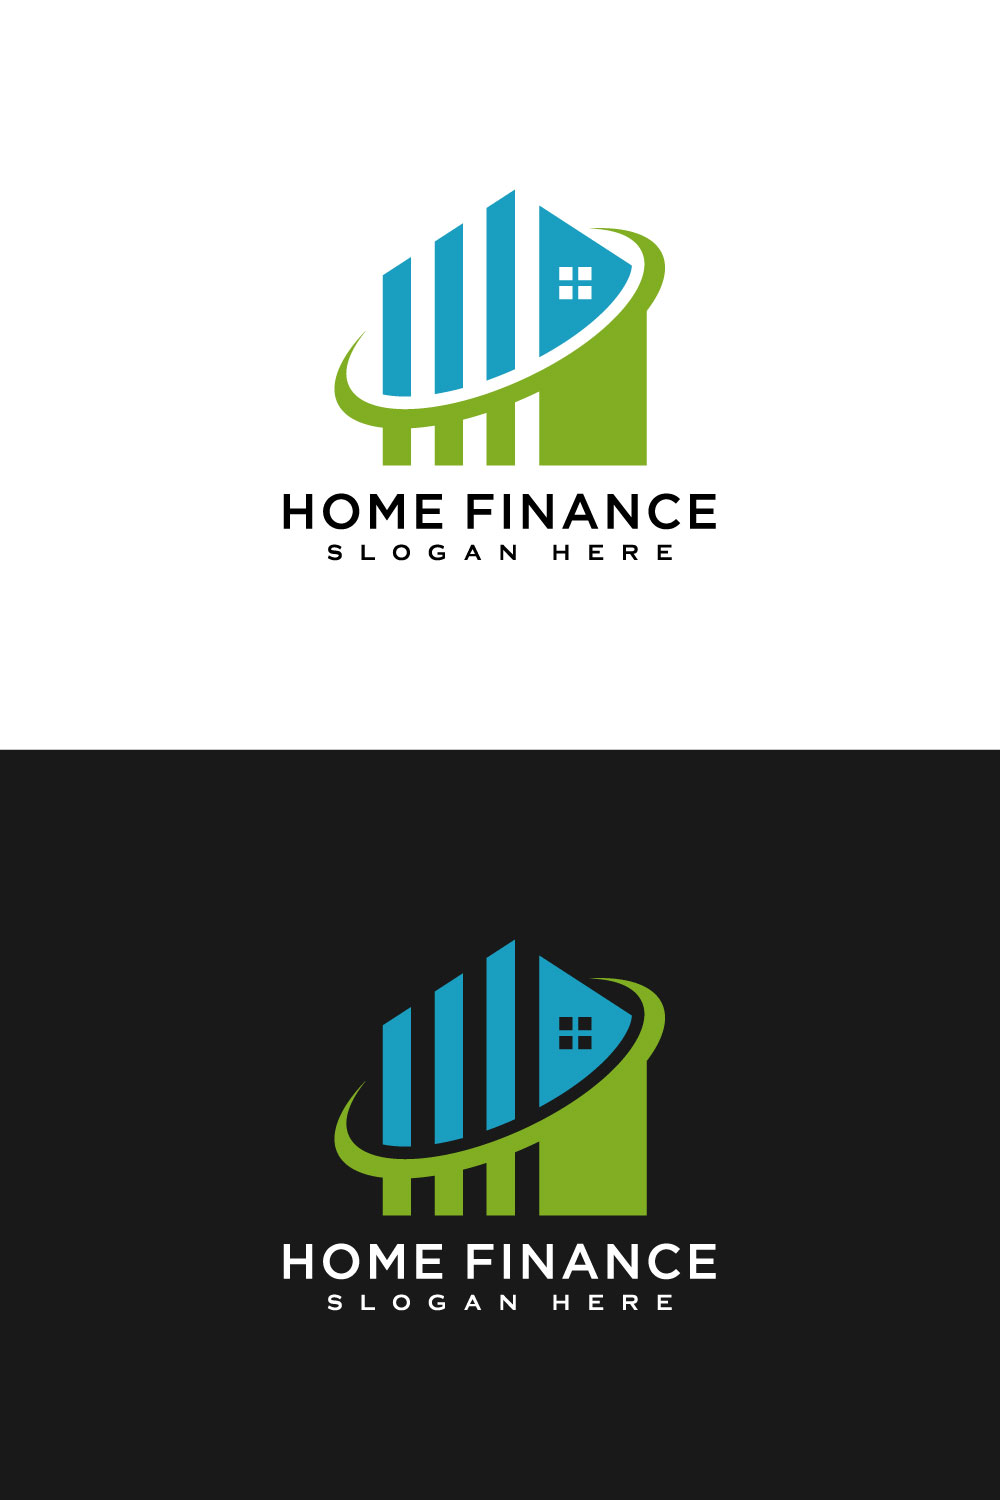 House and Business Finance Logo pinterest.